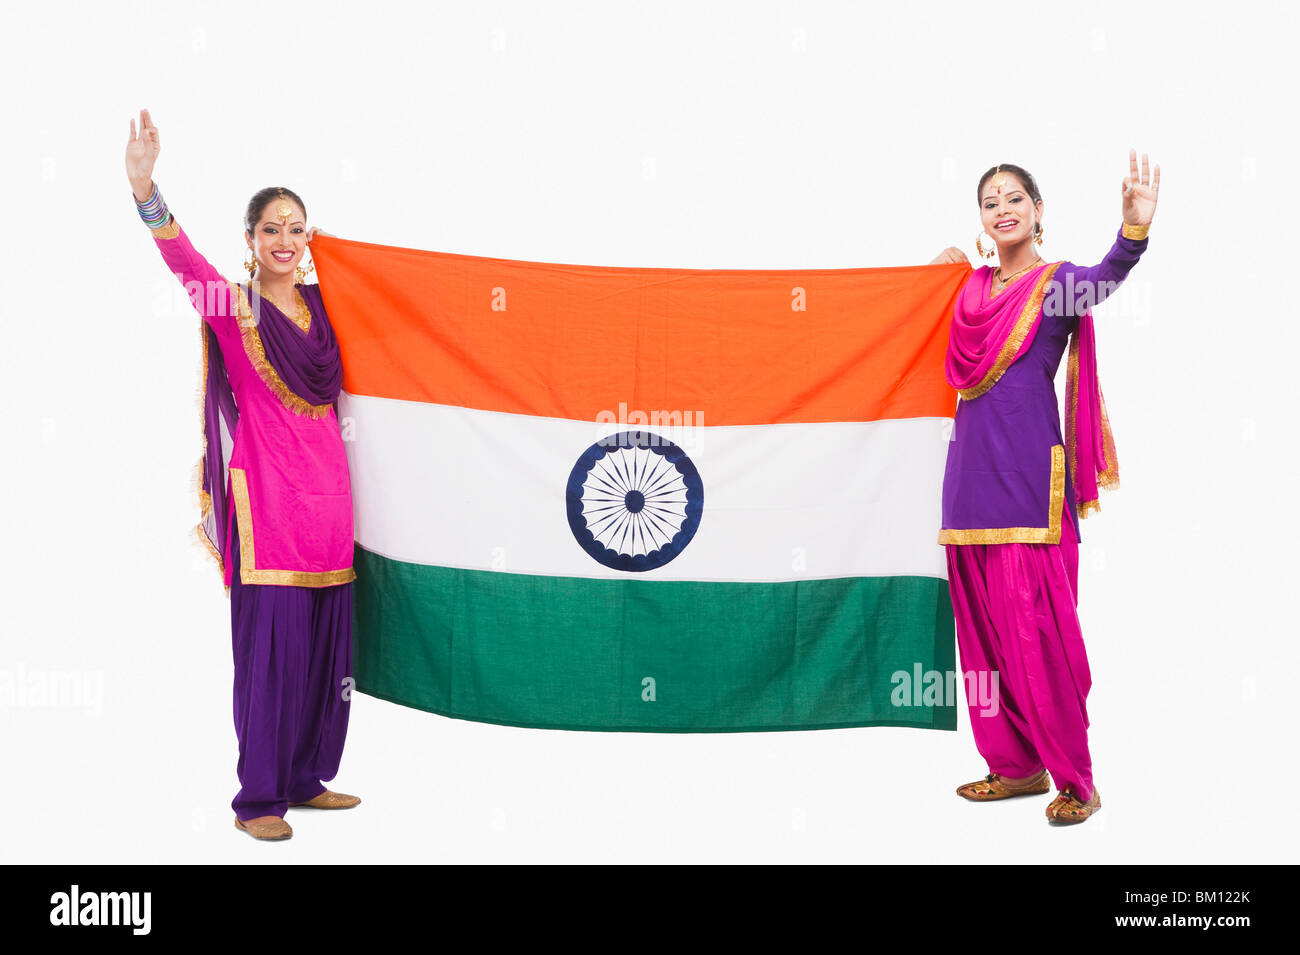 Female Bhangra dancers holding an Indian flag Stock Photo